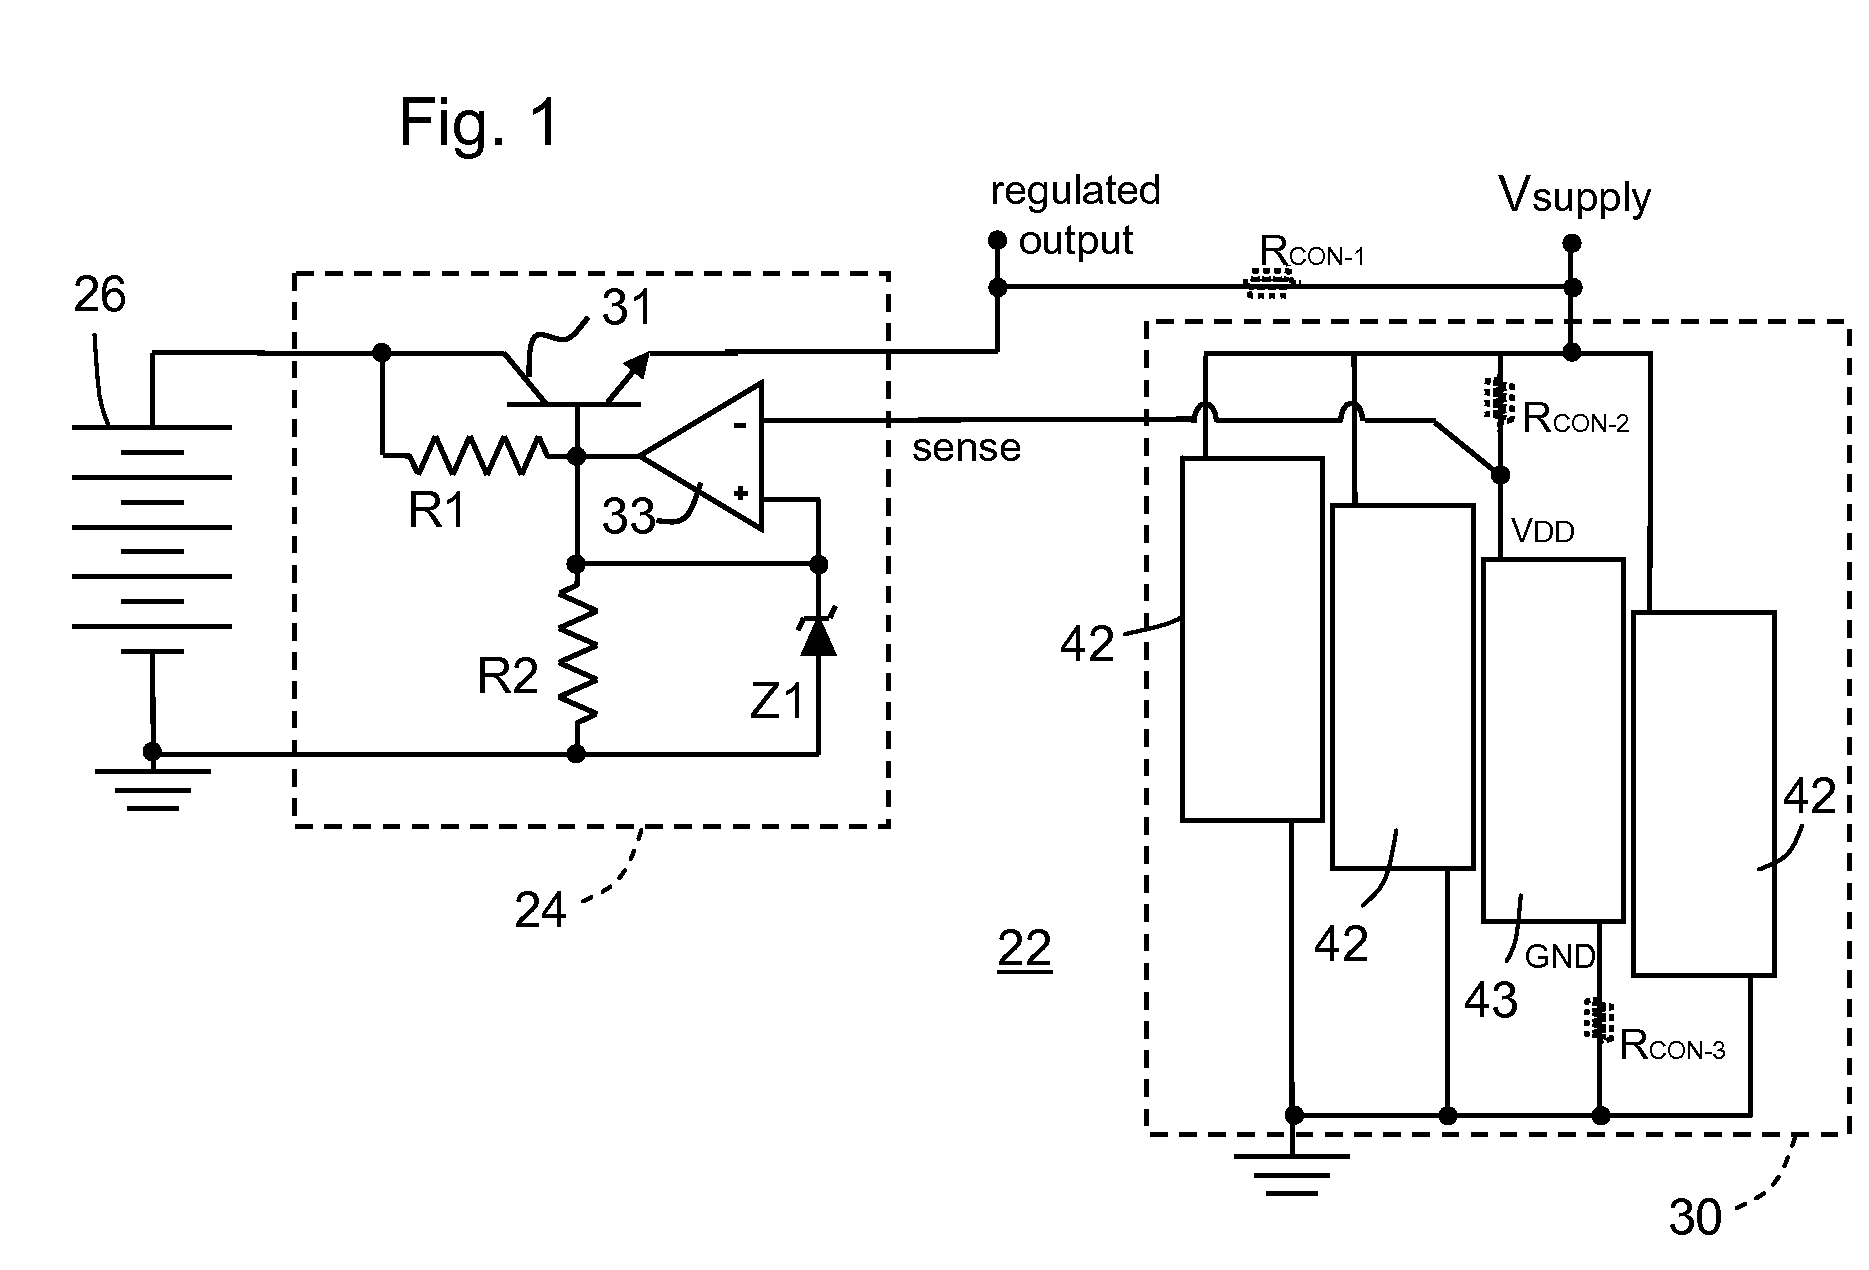 Power supply regulation using kelvin tap for voltage sense feedback from point within integrated circuit load